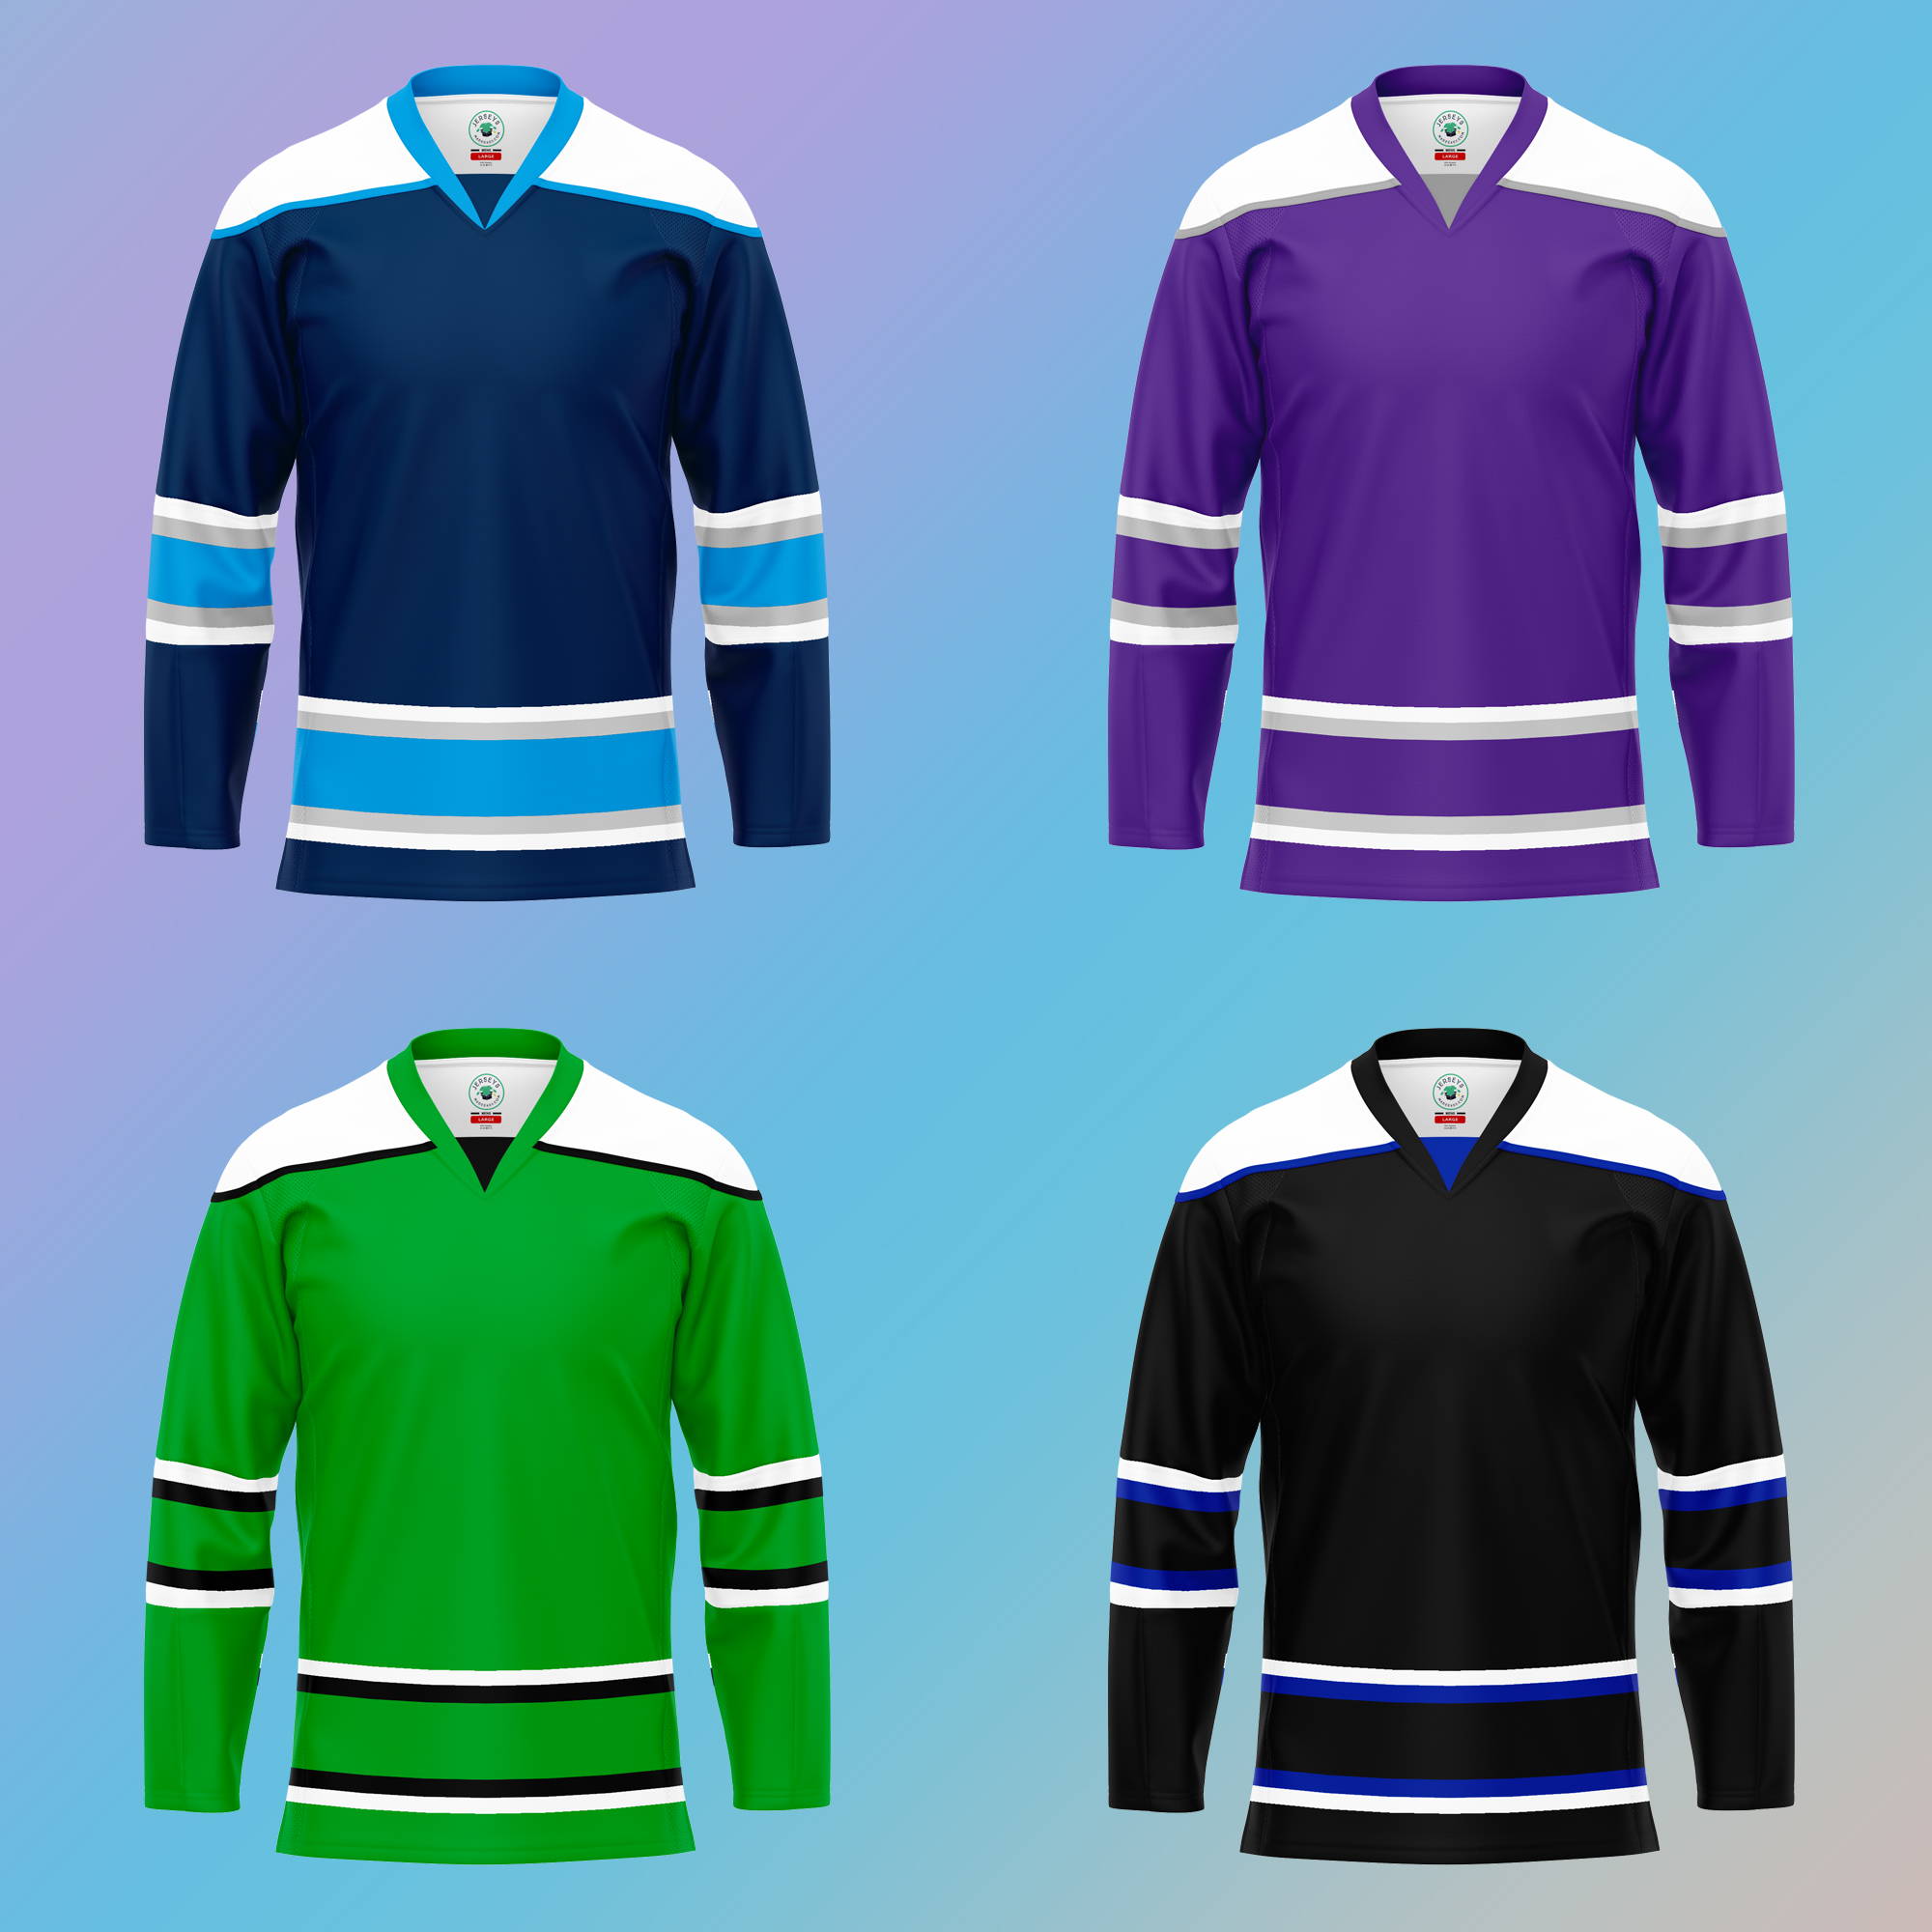 Hockey Jersey Design - any artists wanna attempt jersey design with the  logo / colour scheme? Be creative! Will pay for a final product but would  like to see an unofficial (watermarked)